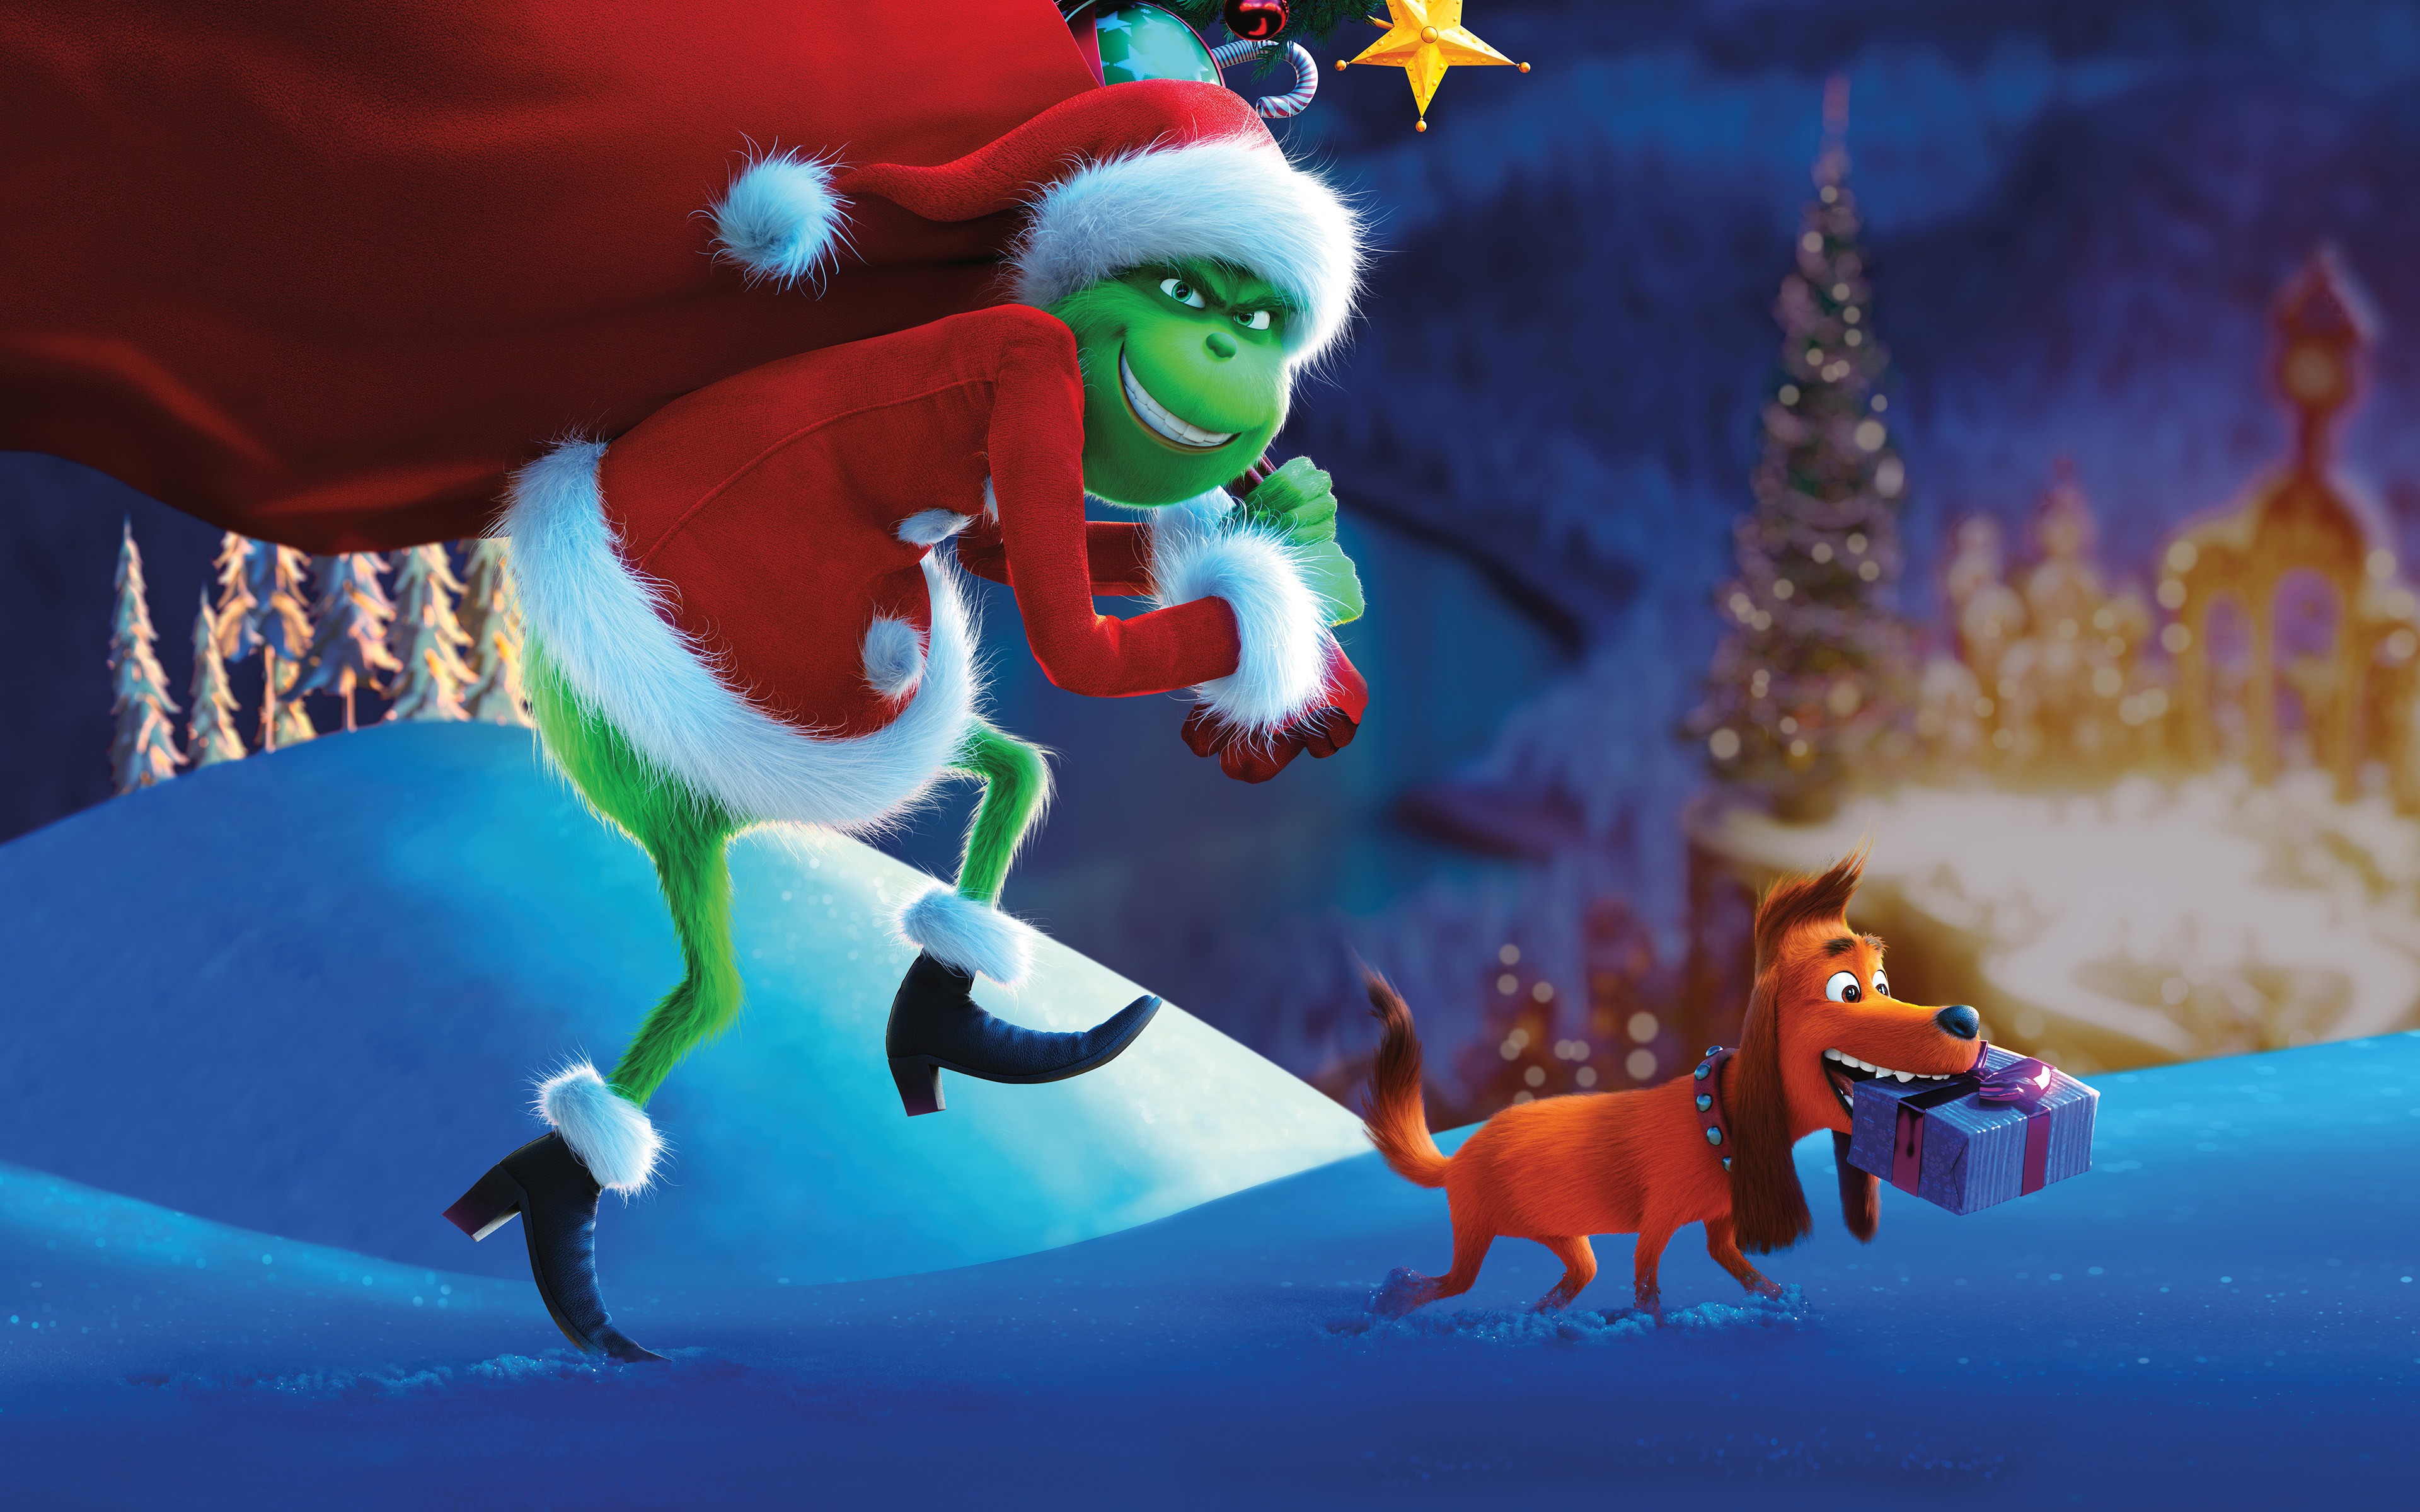 The Grinch 2018 New Animated Christmas Movie Wallpaper - Grinch Background - HD Wallpaper 